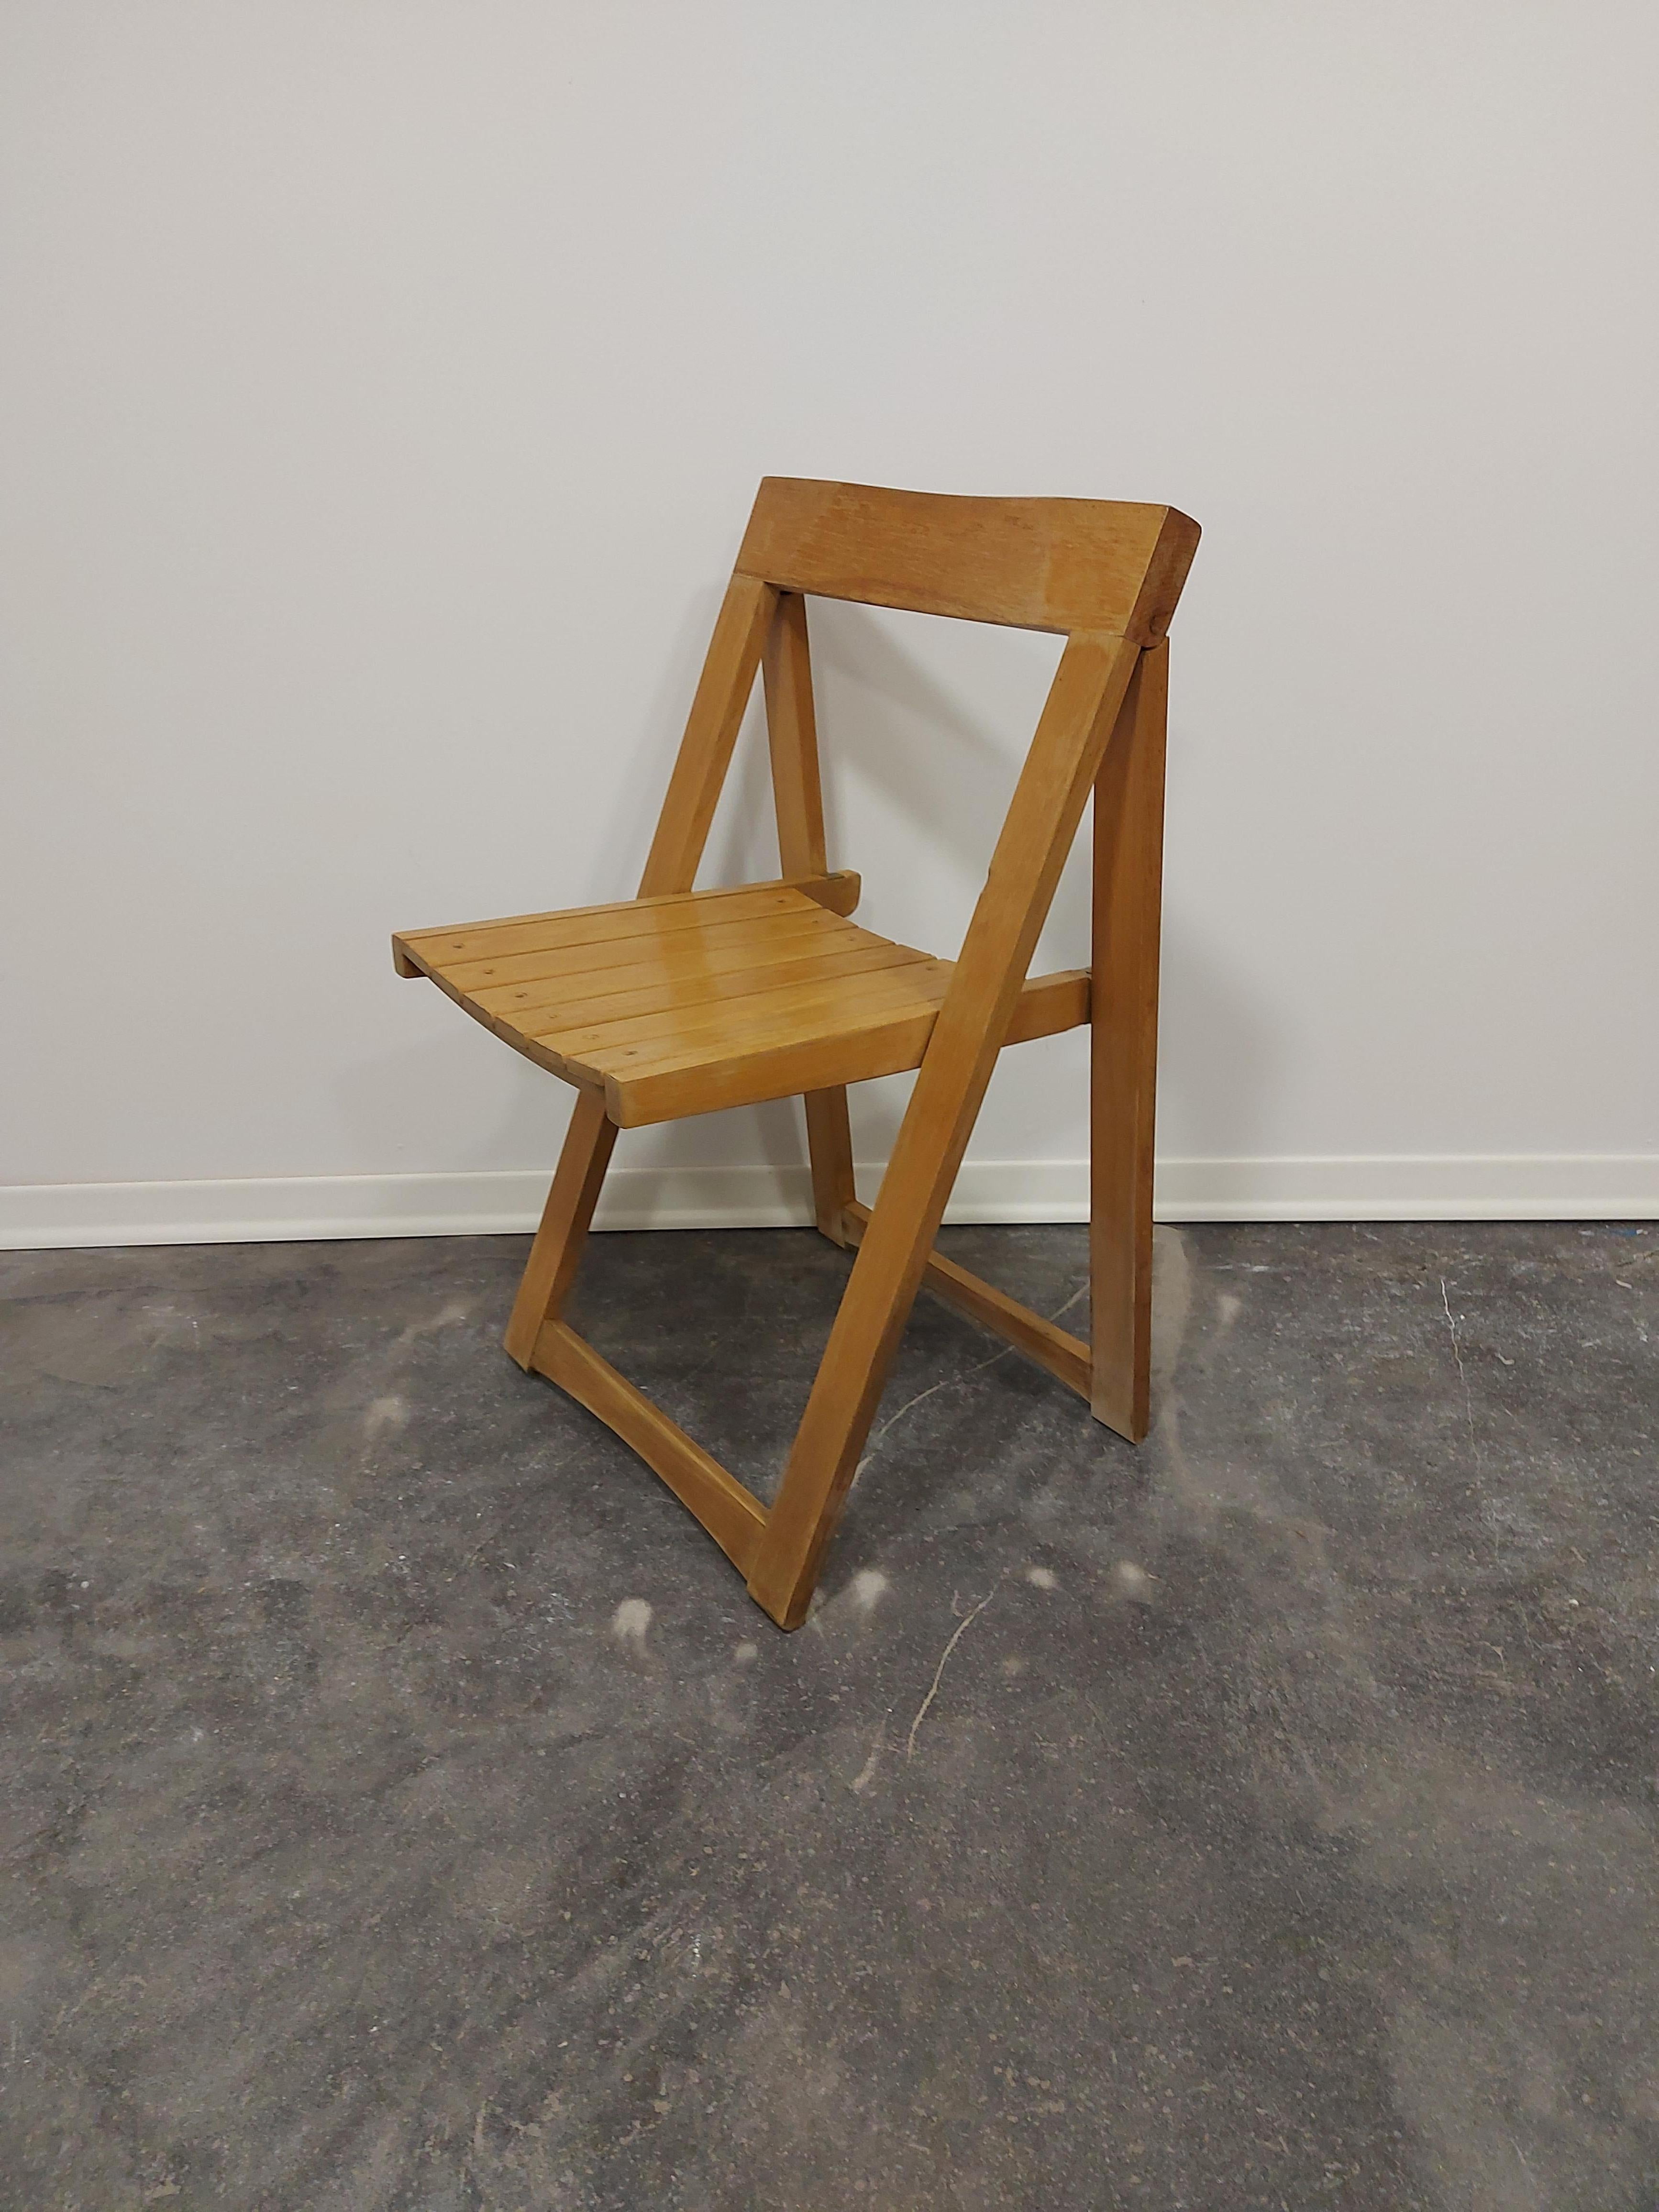 Folding Chair by Aldo Jacober, 1970s 1 of 4 For Sale 1